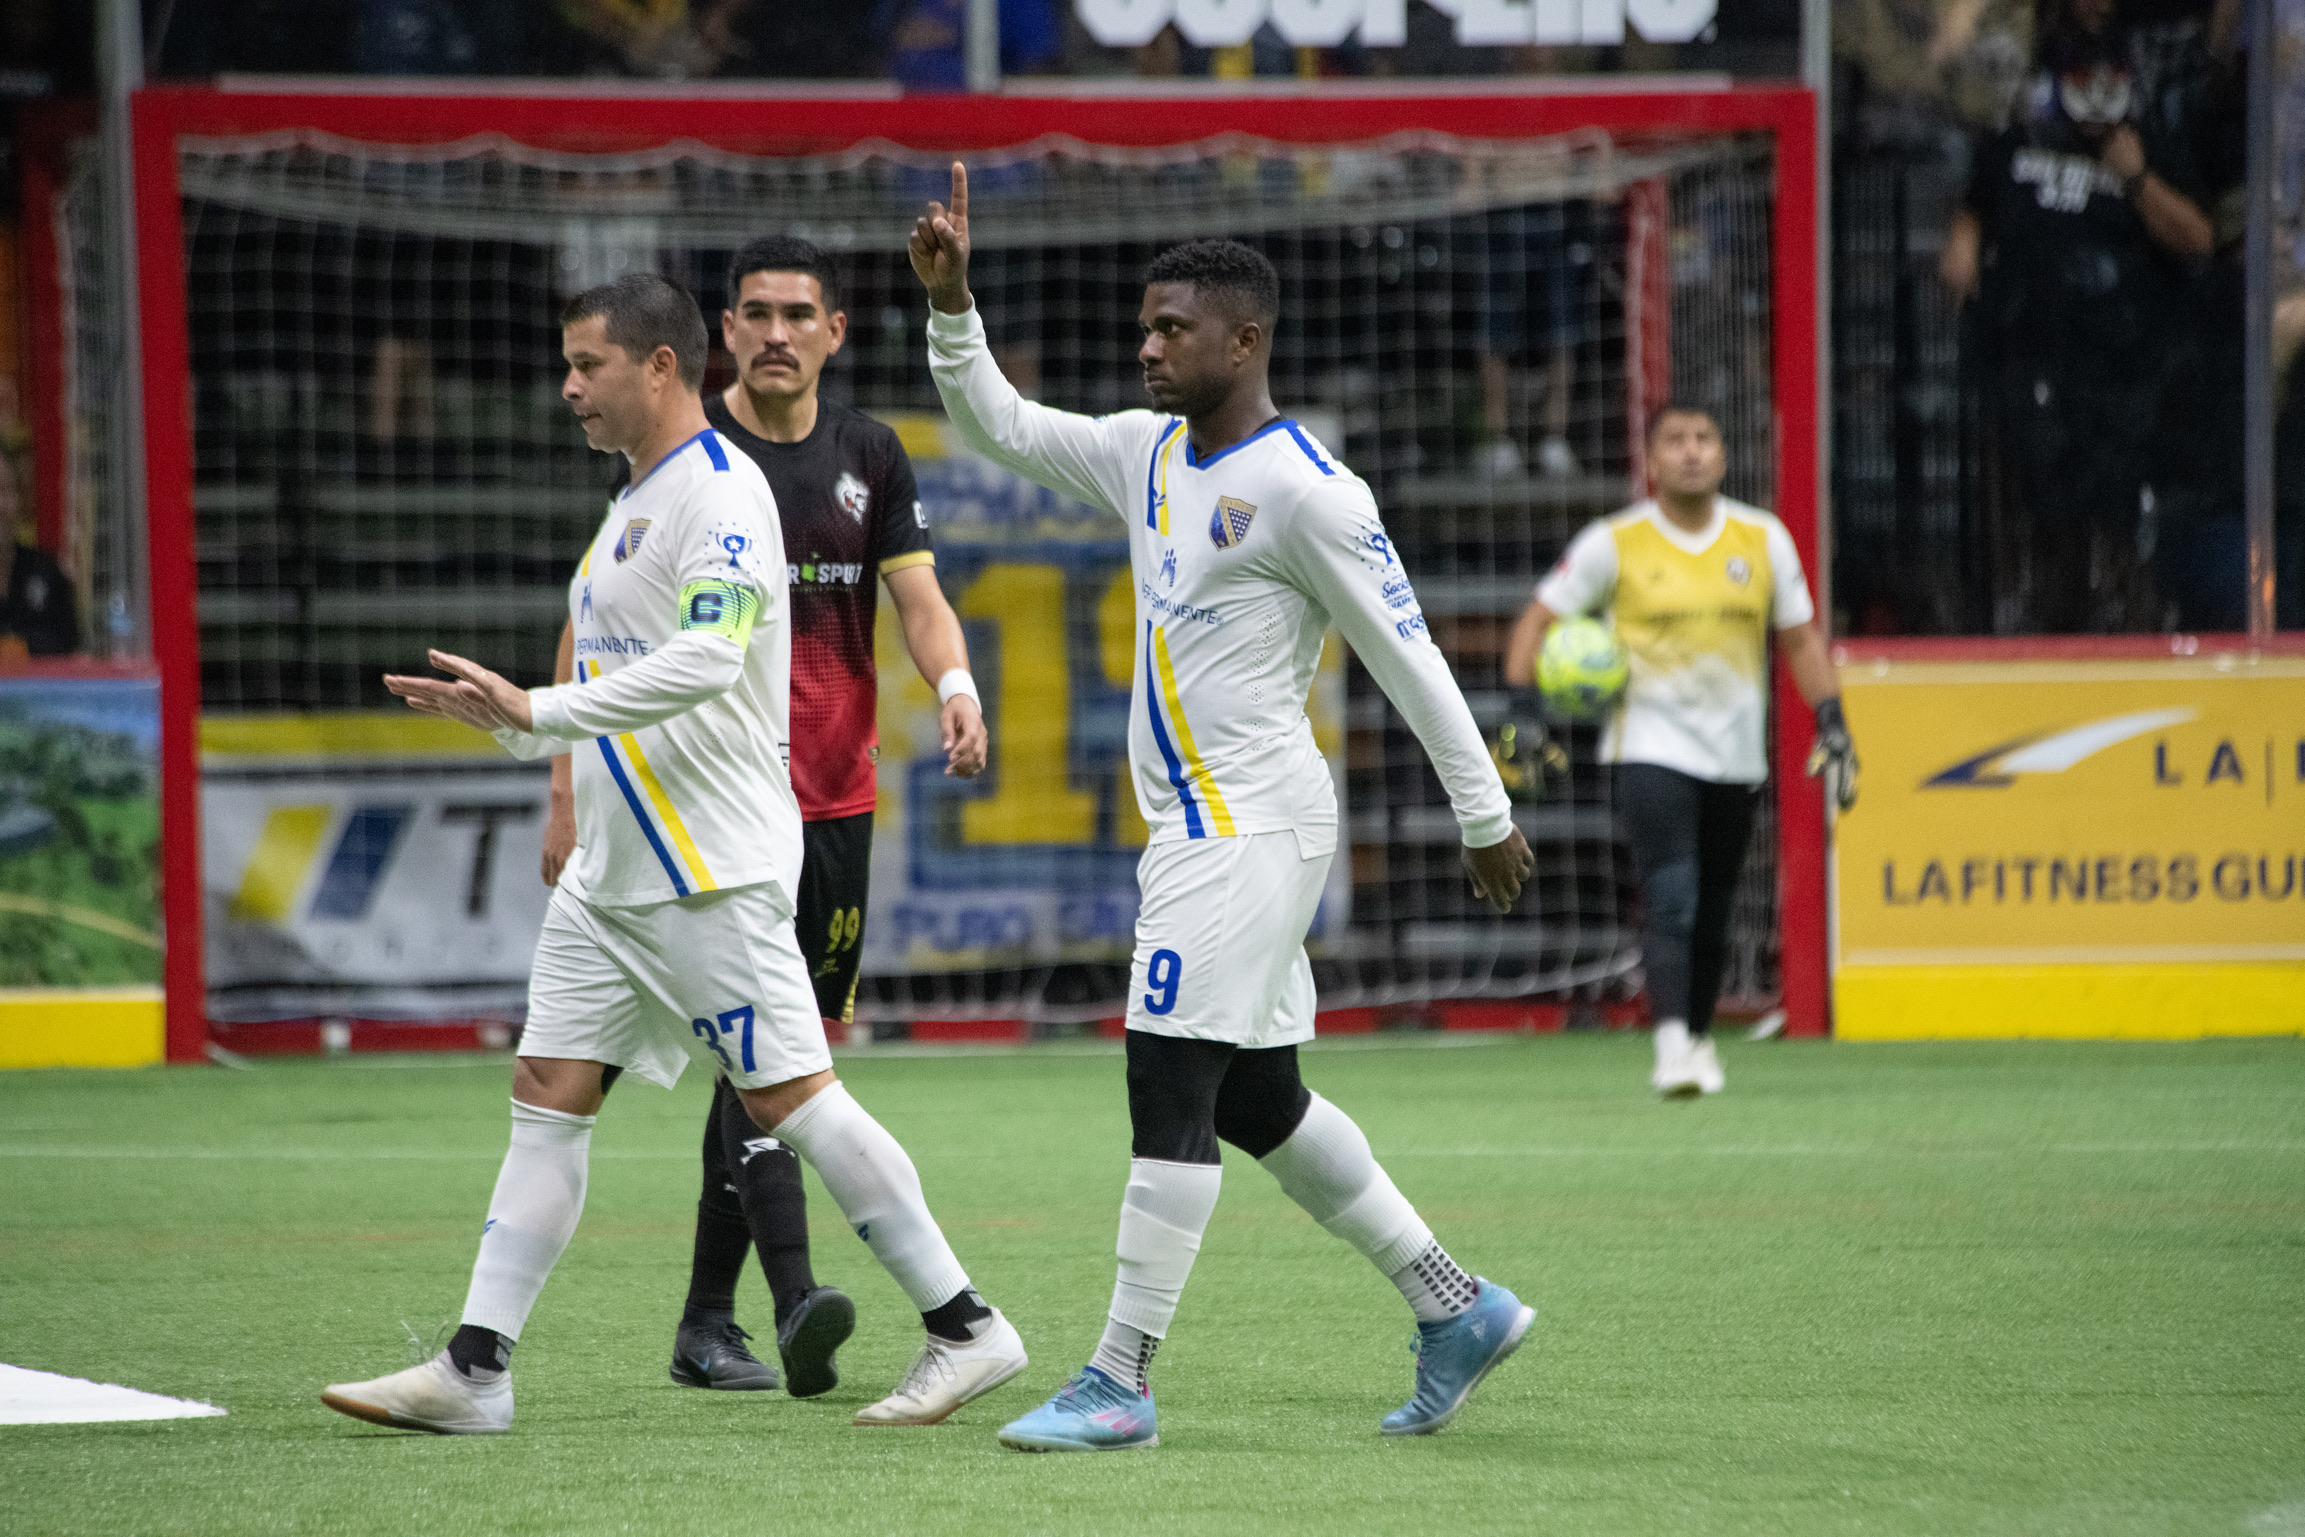 San Diego Sockers defeated the Chihuahua Savage in the 2022 MASL Western Conference Final.